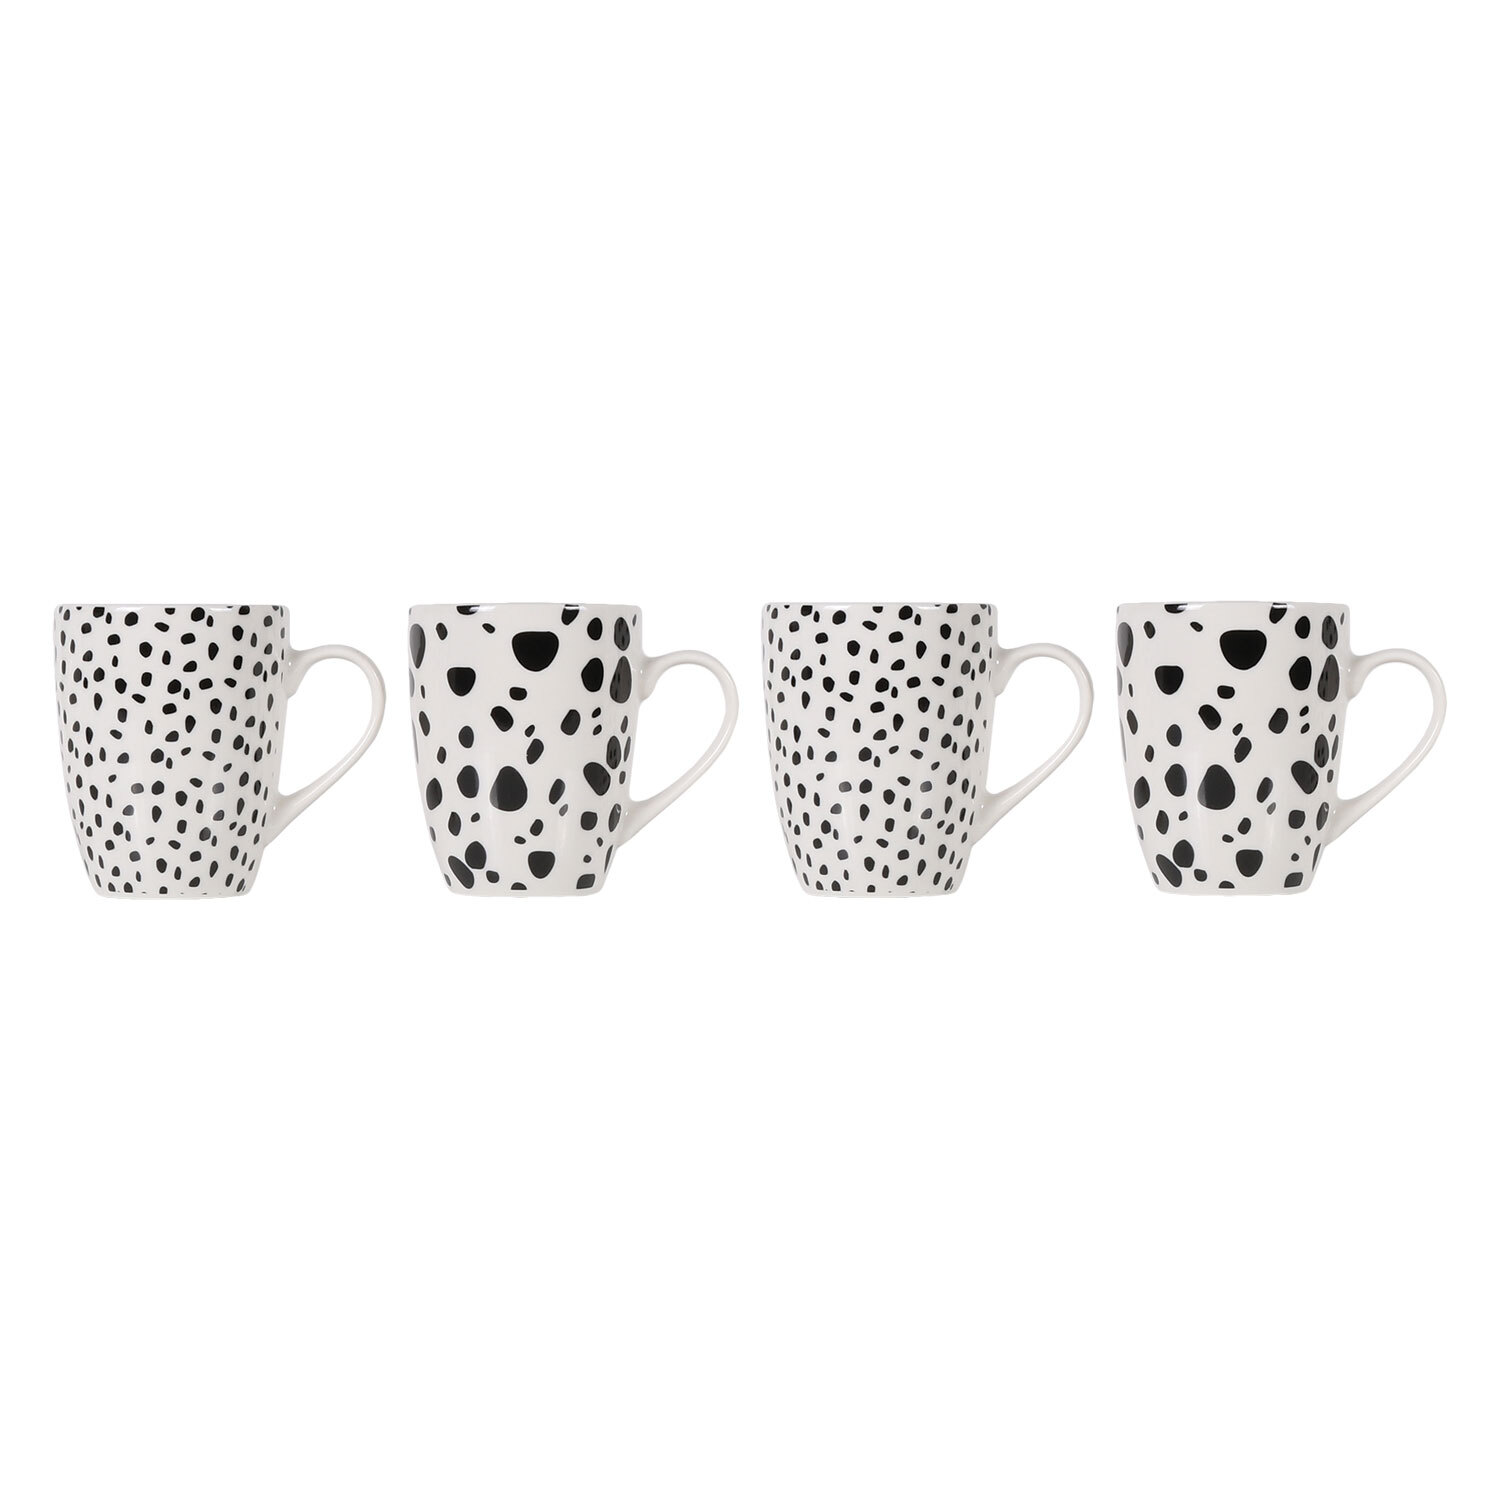 Monochrome Bullet Mugs Assorted 4 Pack Image